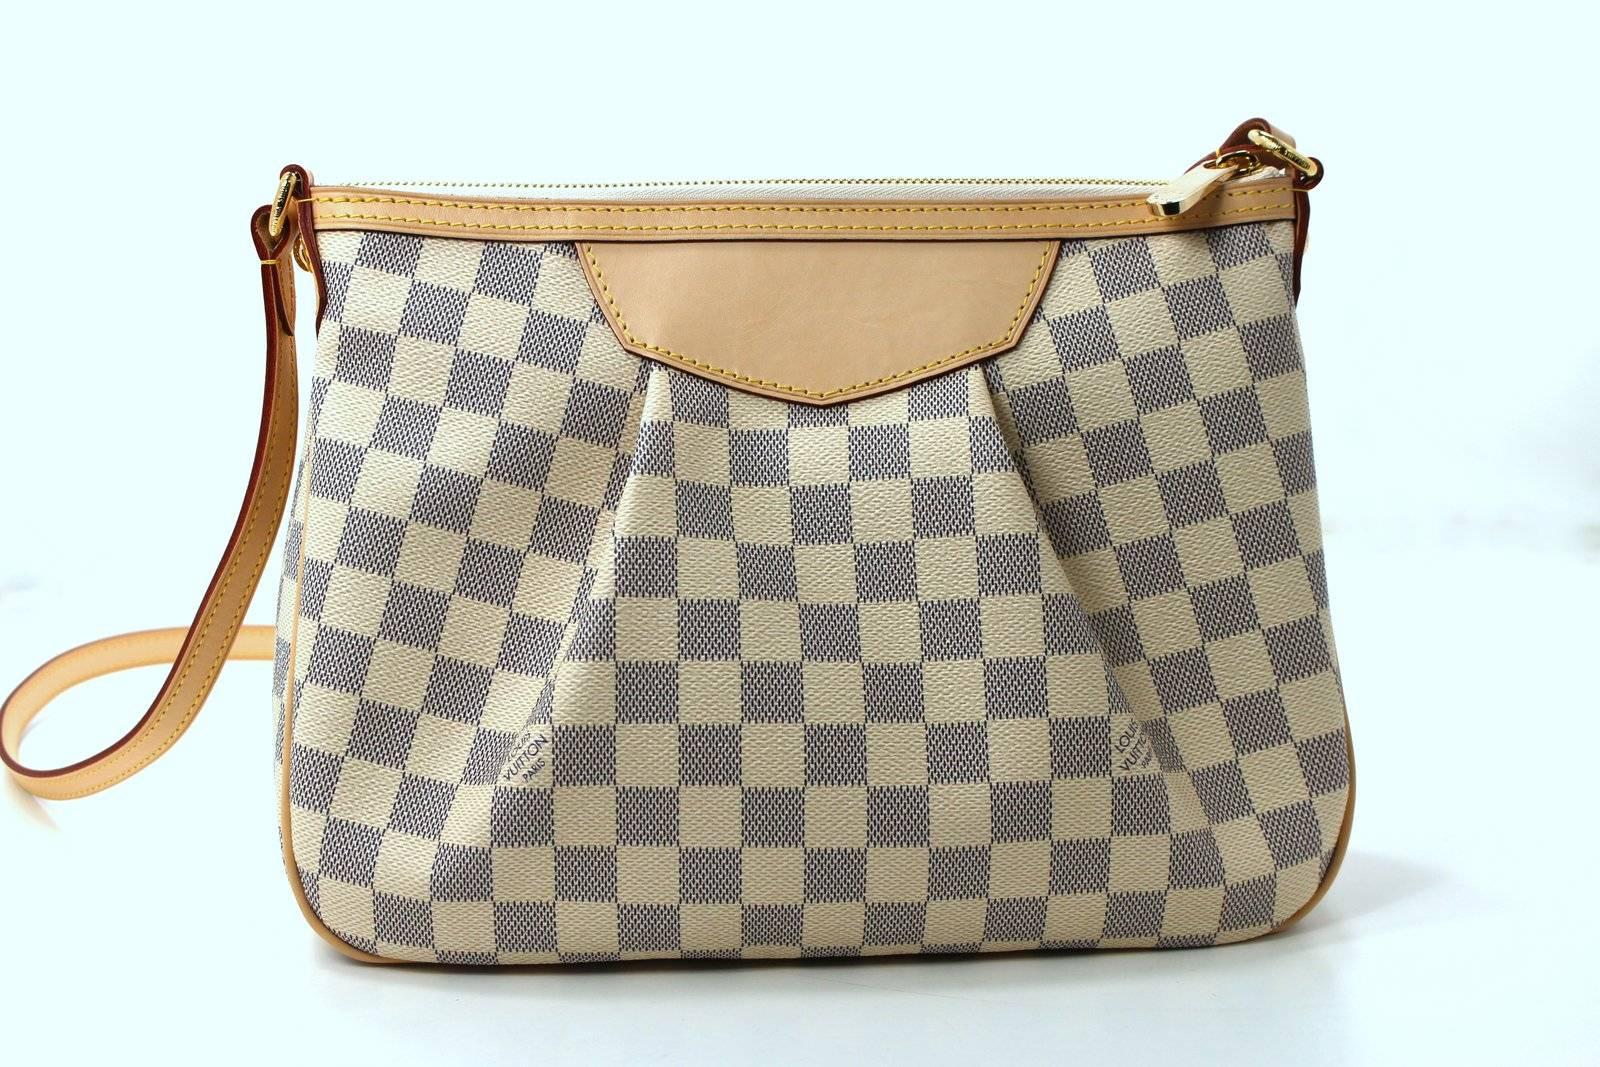 MINT CONDITION Louis Vuitton Damier Azur Siracusa PM Crossbody Bag

  Carried maybe once; no signs of wear.
  Current LV style carried cross body or on the shoulder.  Retail over $1,270.00 with taxes.  This is the PM size, yet it is quite roomy